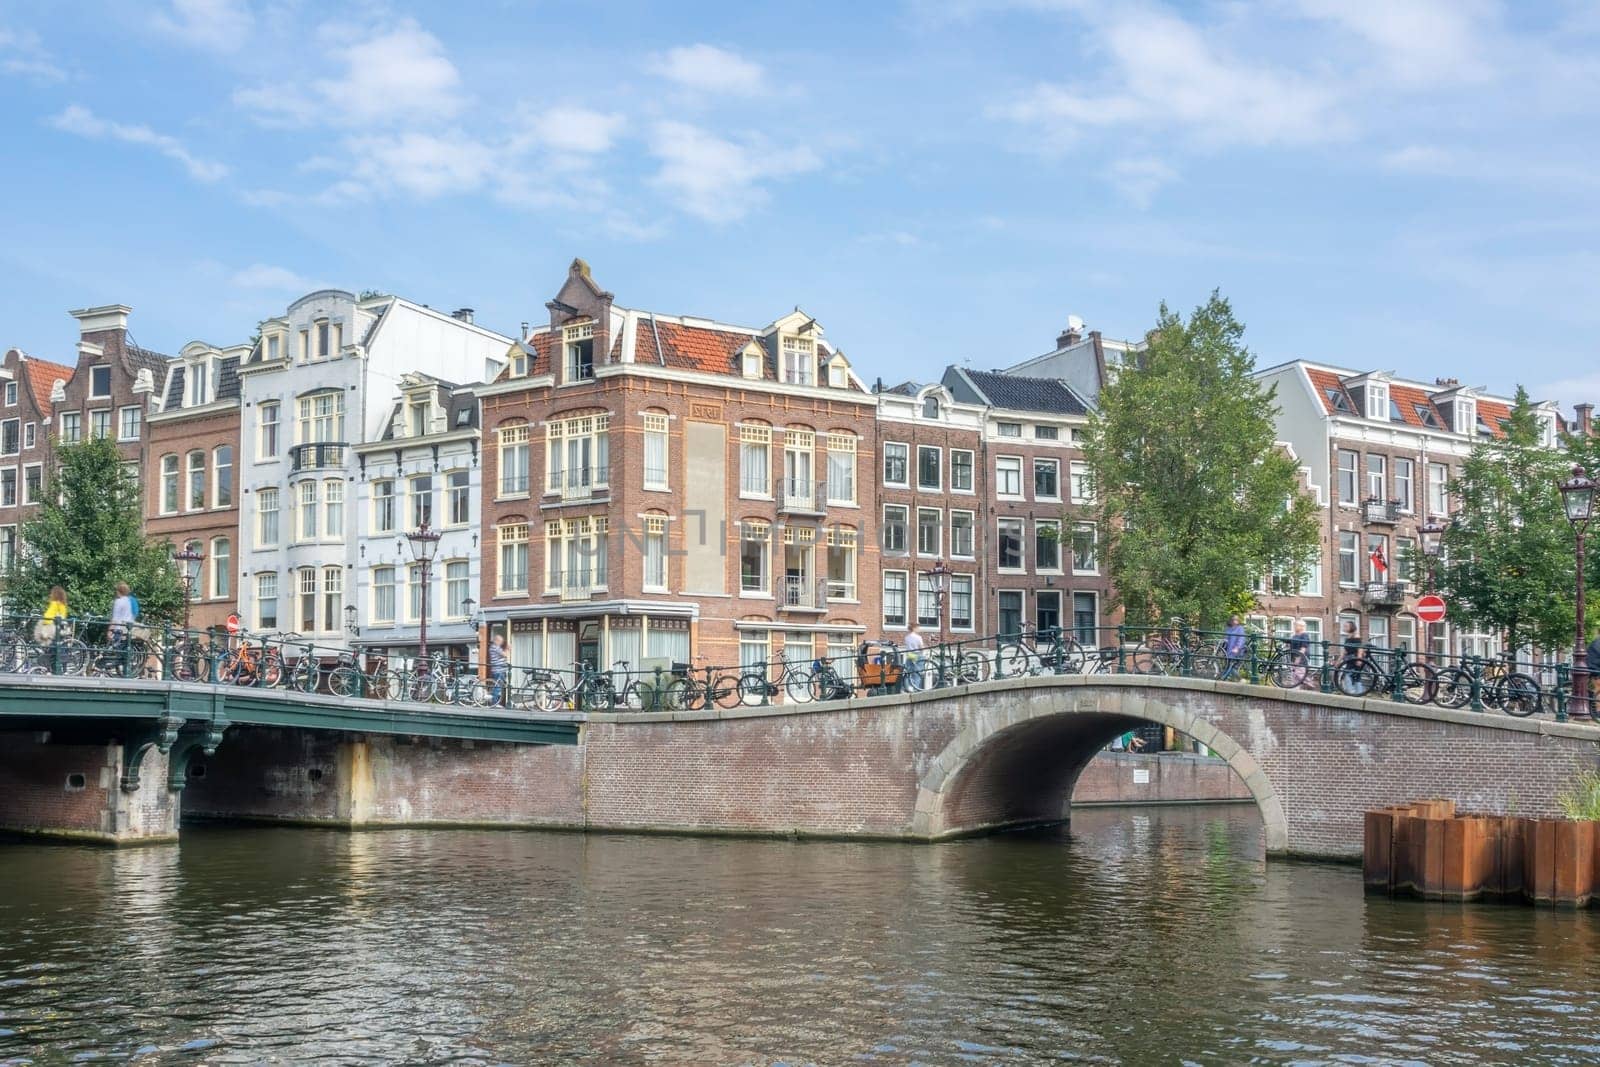 Netherlands. Summer day. Typical Dutch houses on the waterfront of Amsterdam. Stone bridges at the confluence of canals